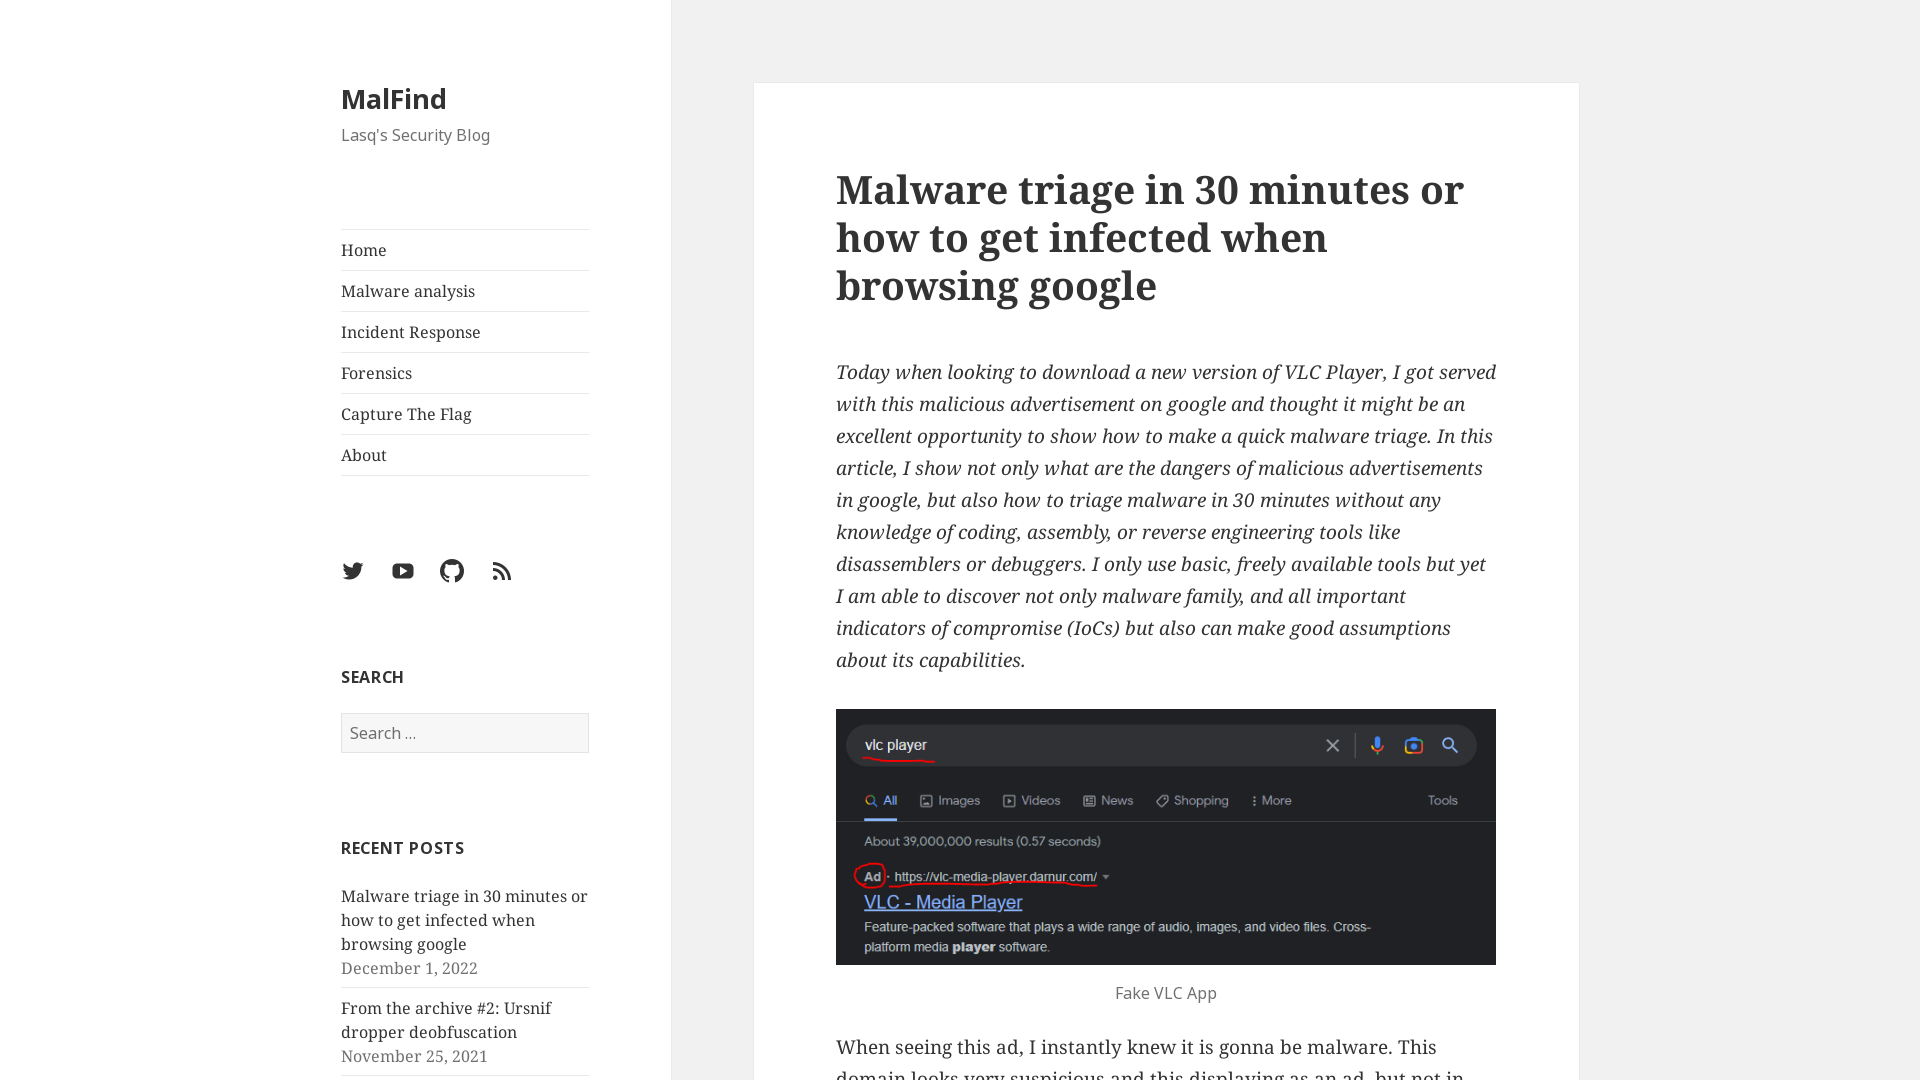 Malware triage in 30 minutes or how to get infected when browsing google – MalFind